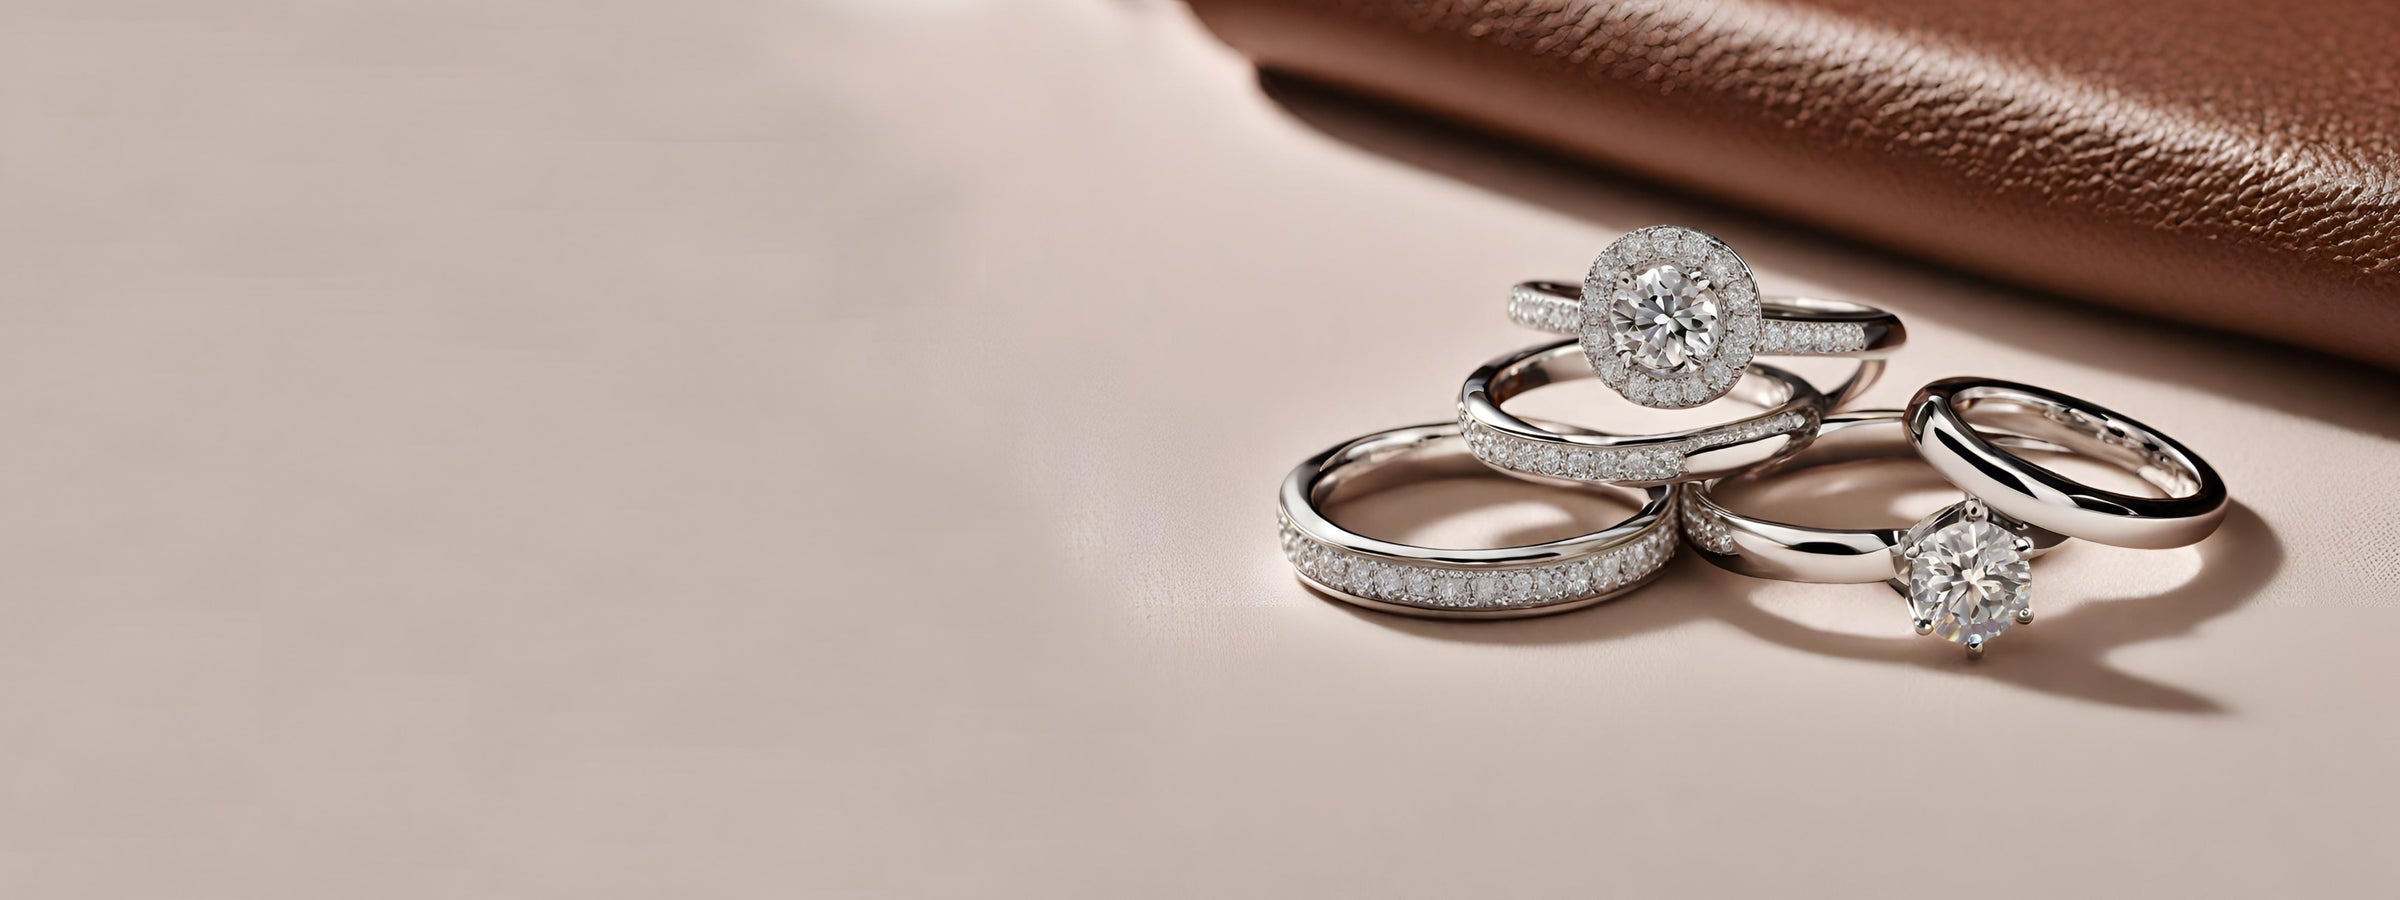 EarthShine Jewels for Engagement Rings, Wedding Bands & Diamond